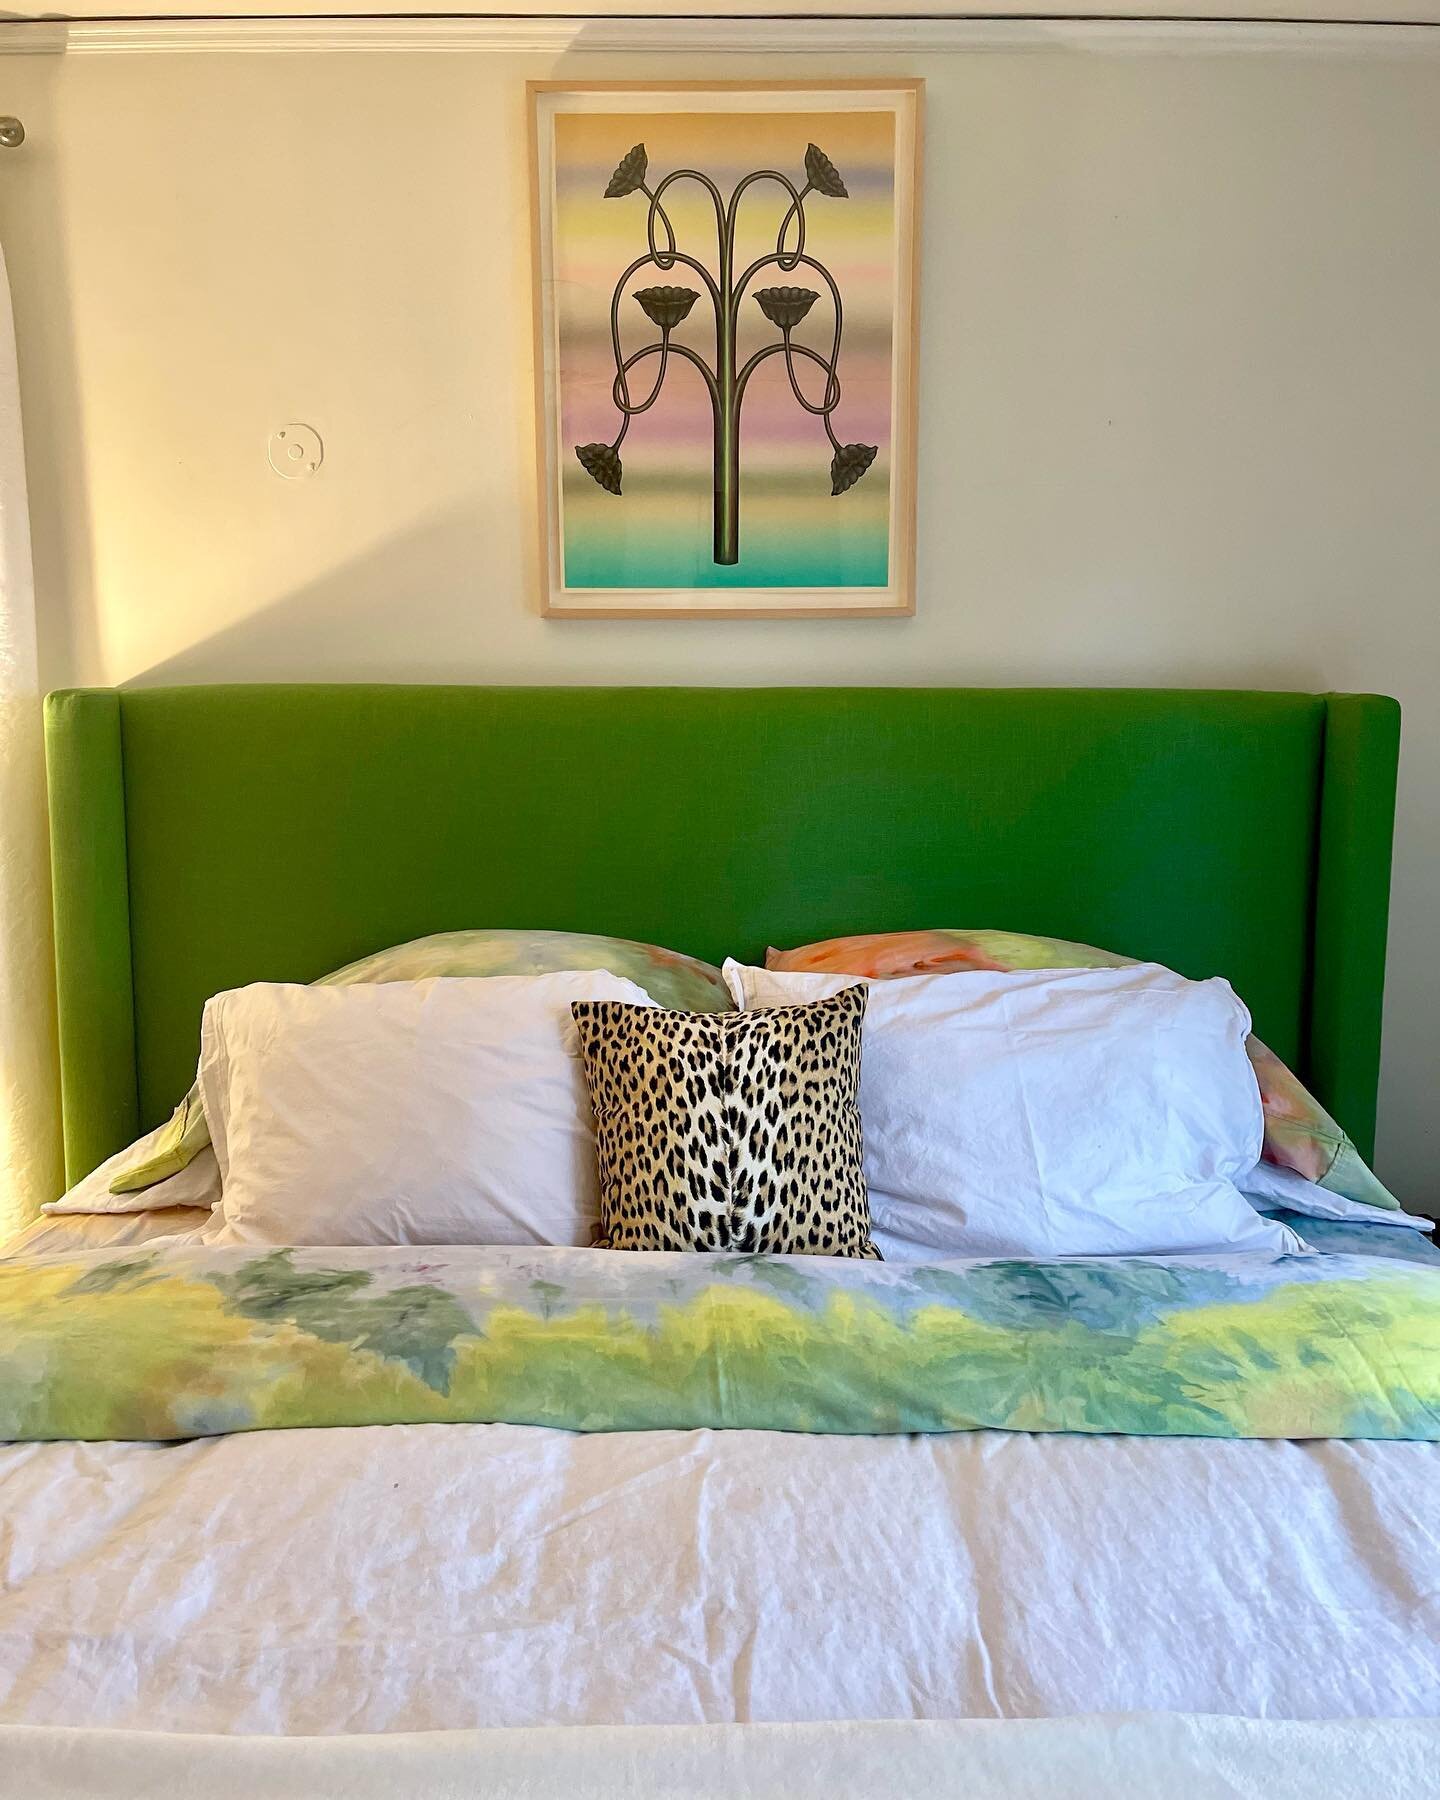 We&rsquo;ll even make sheets to match your art! Thanks for all your support @indiairving 💚We love your @mollyagreene above your bed too. 💫 #futurefibers